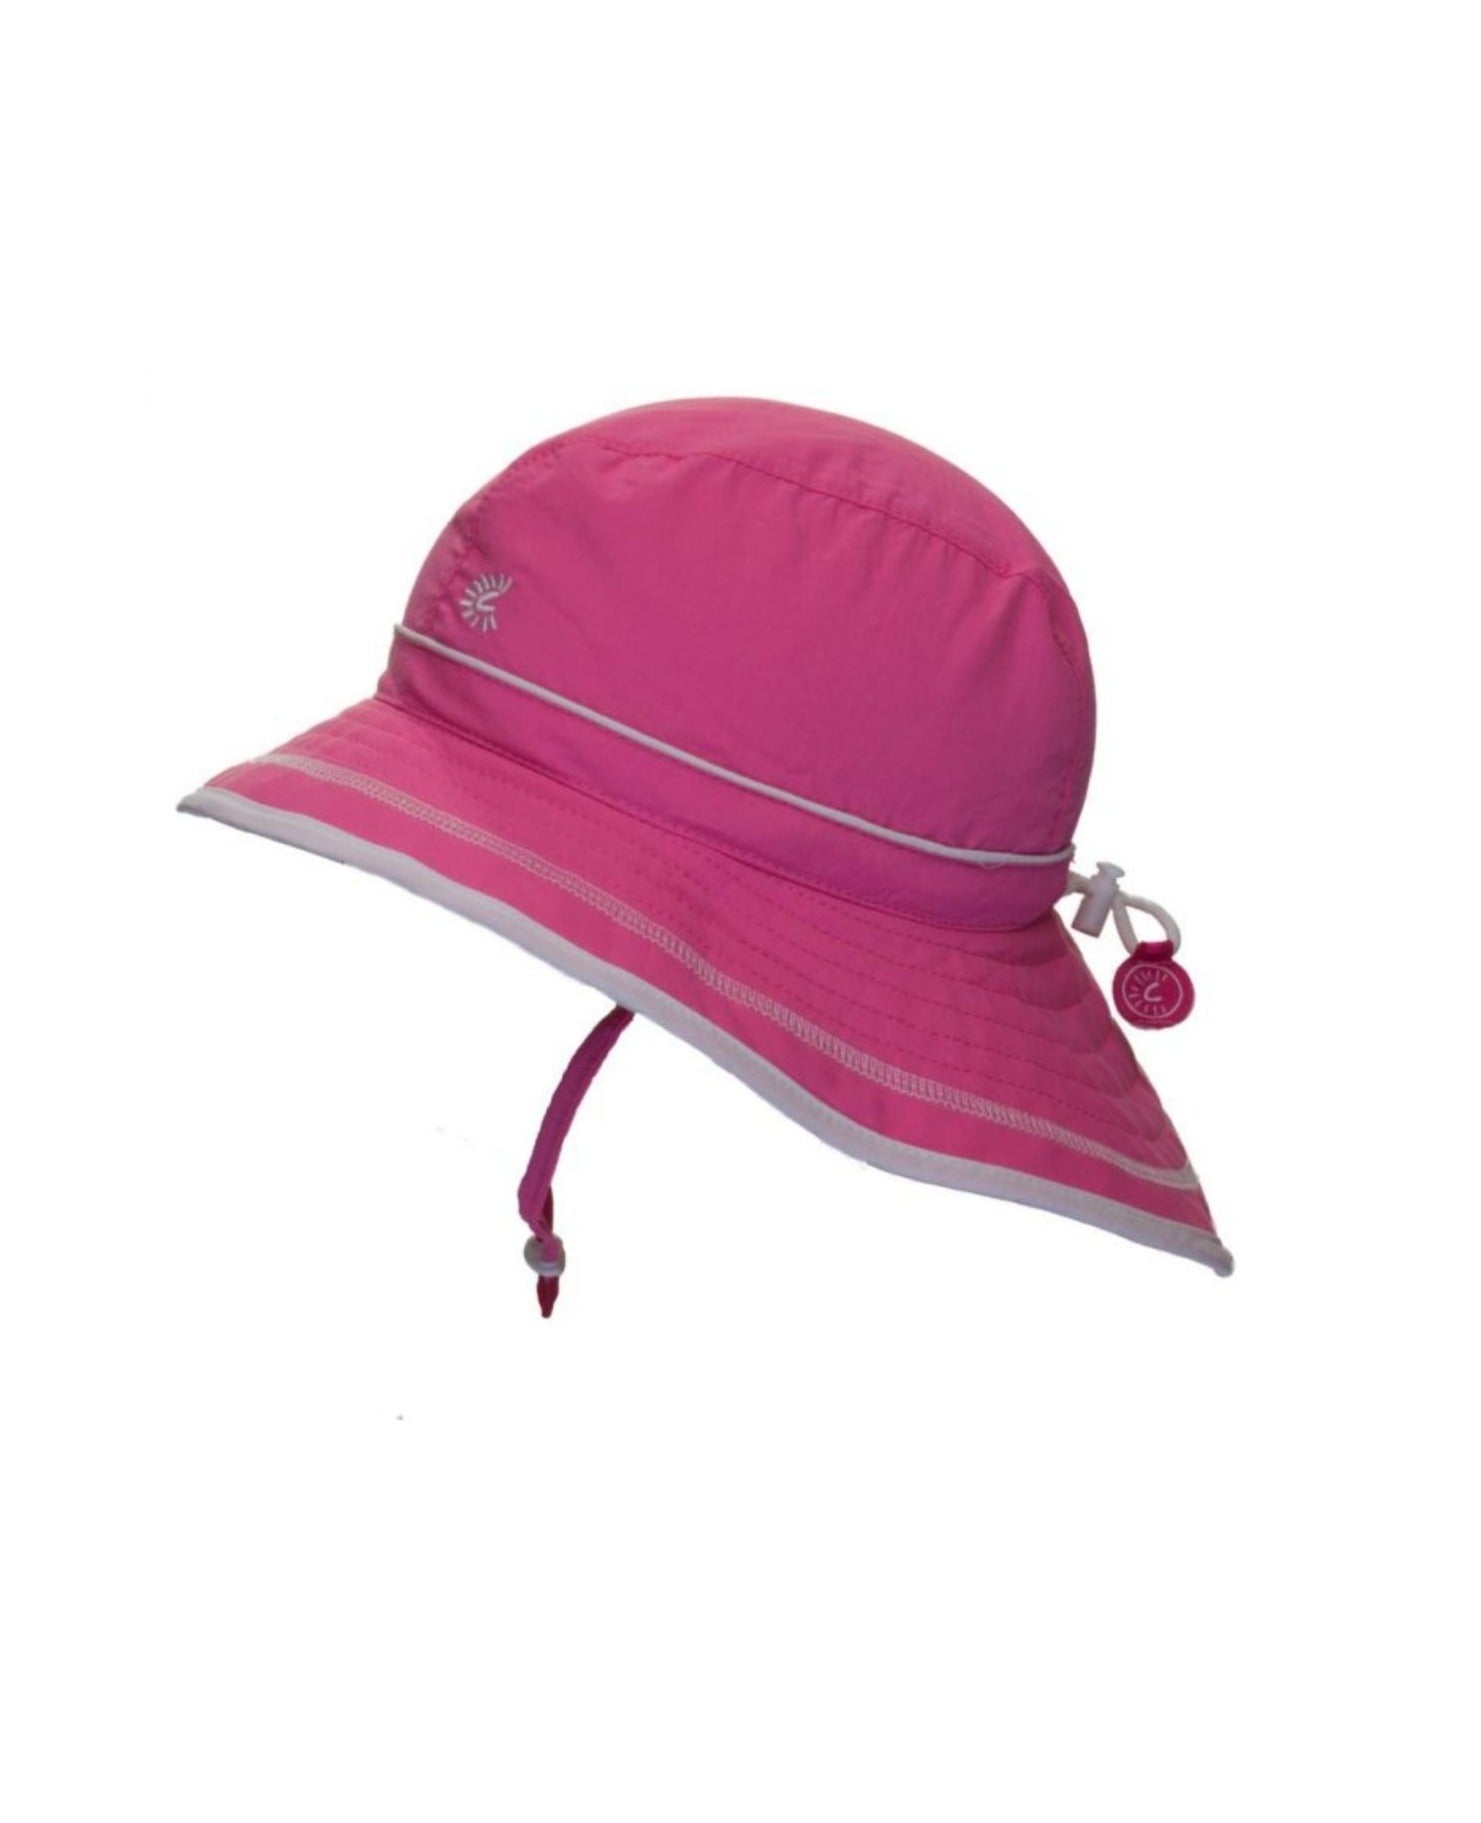 pink sun hat with white details and adjustable straps